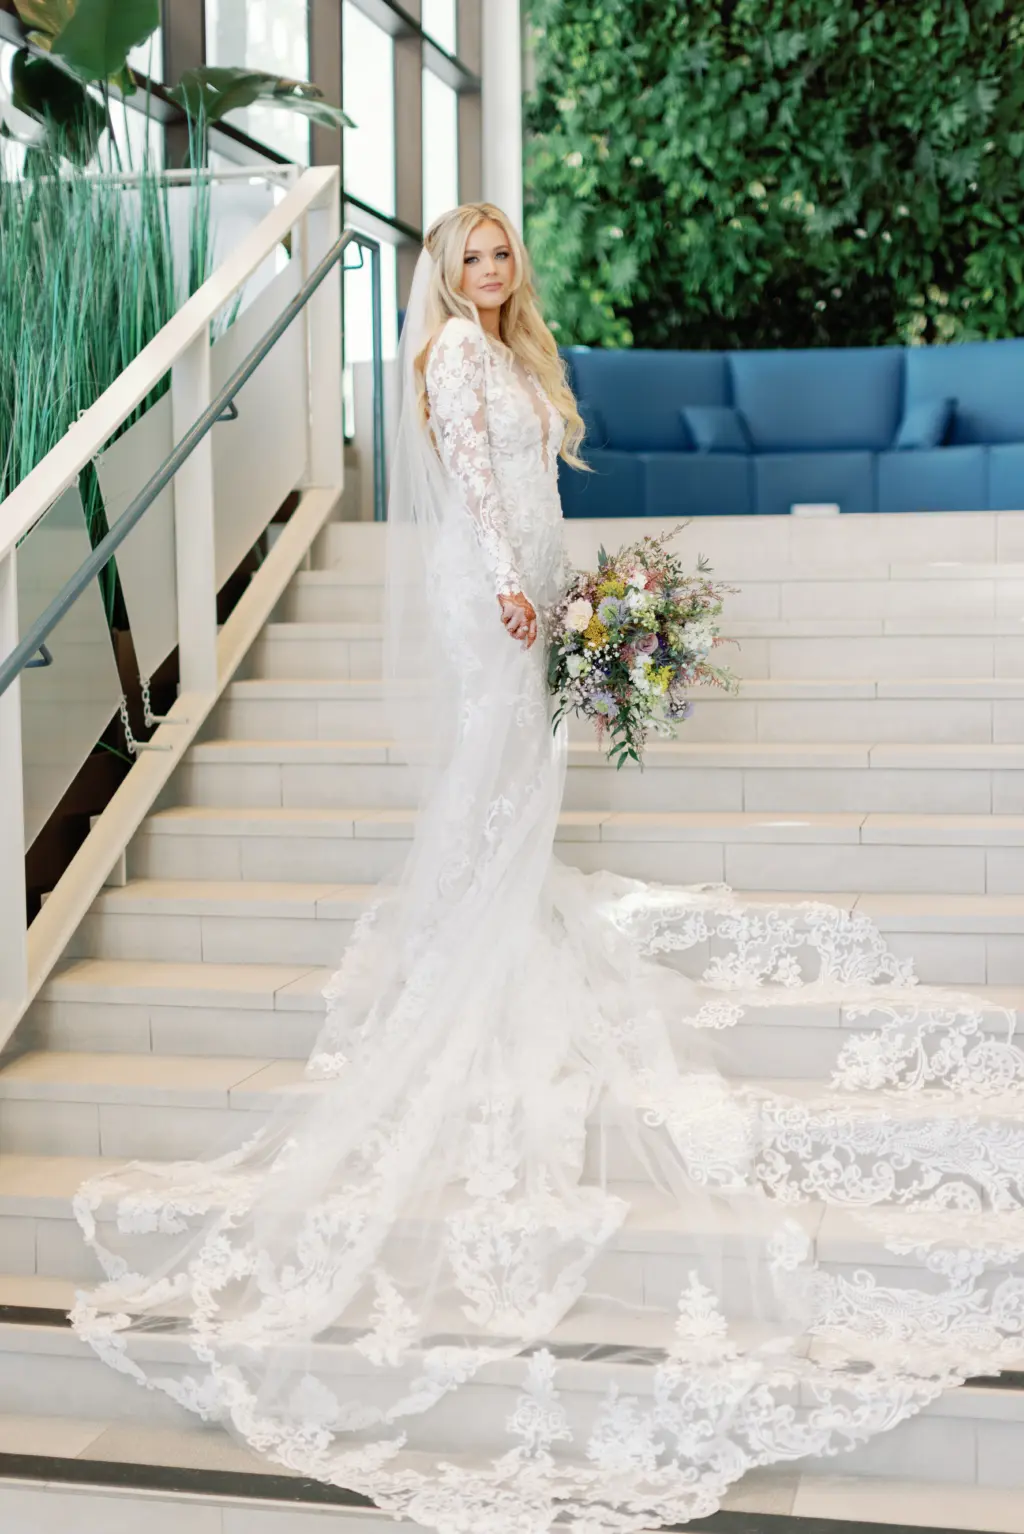 White Sheer Long-Sleeve Illusion Deep V-Neckline Pronovias Fit and Flare Wedding Dress Ideas | Cathedral Length Lace Veil Inspiration